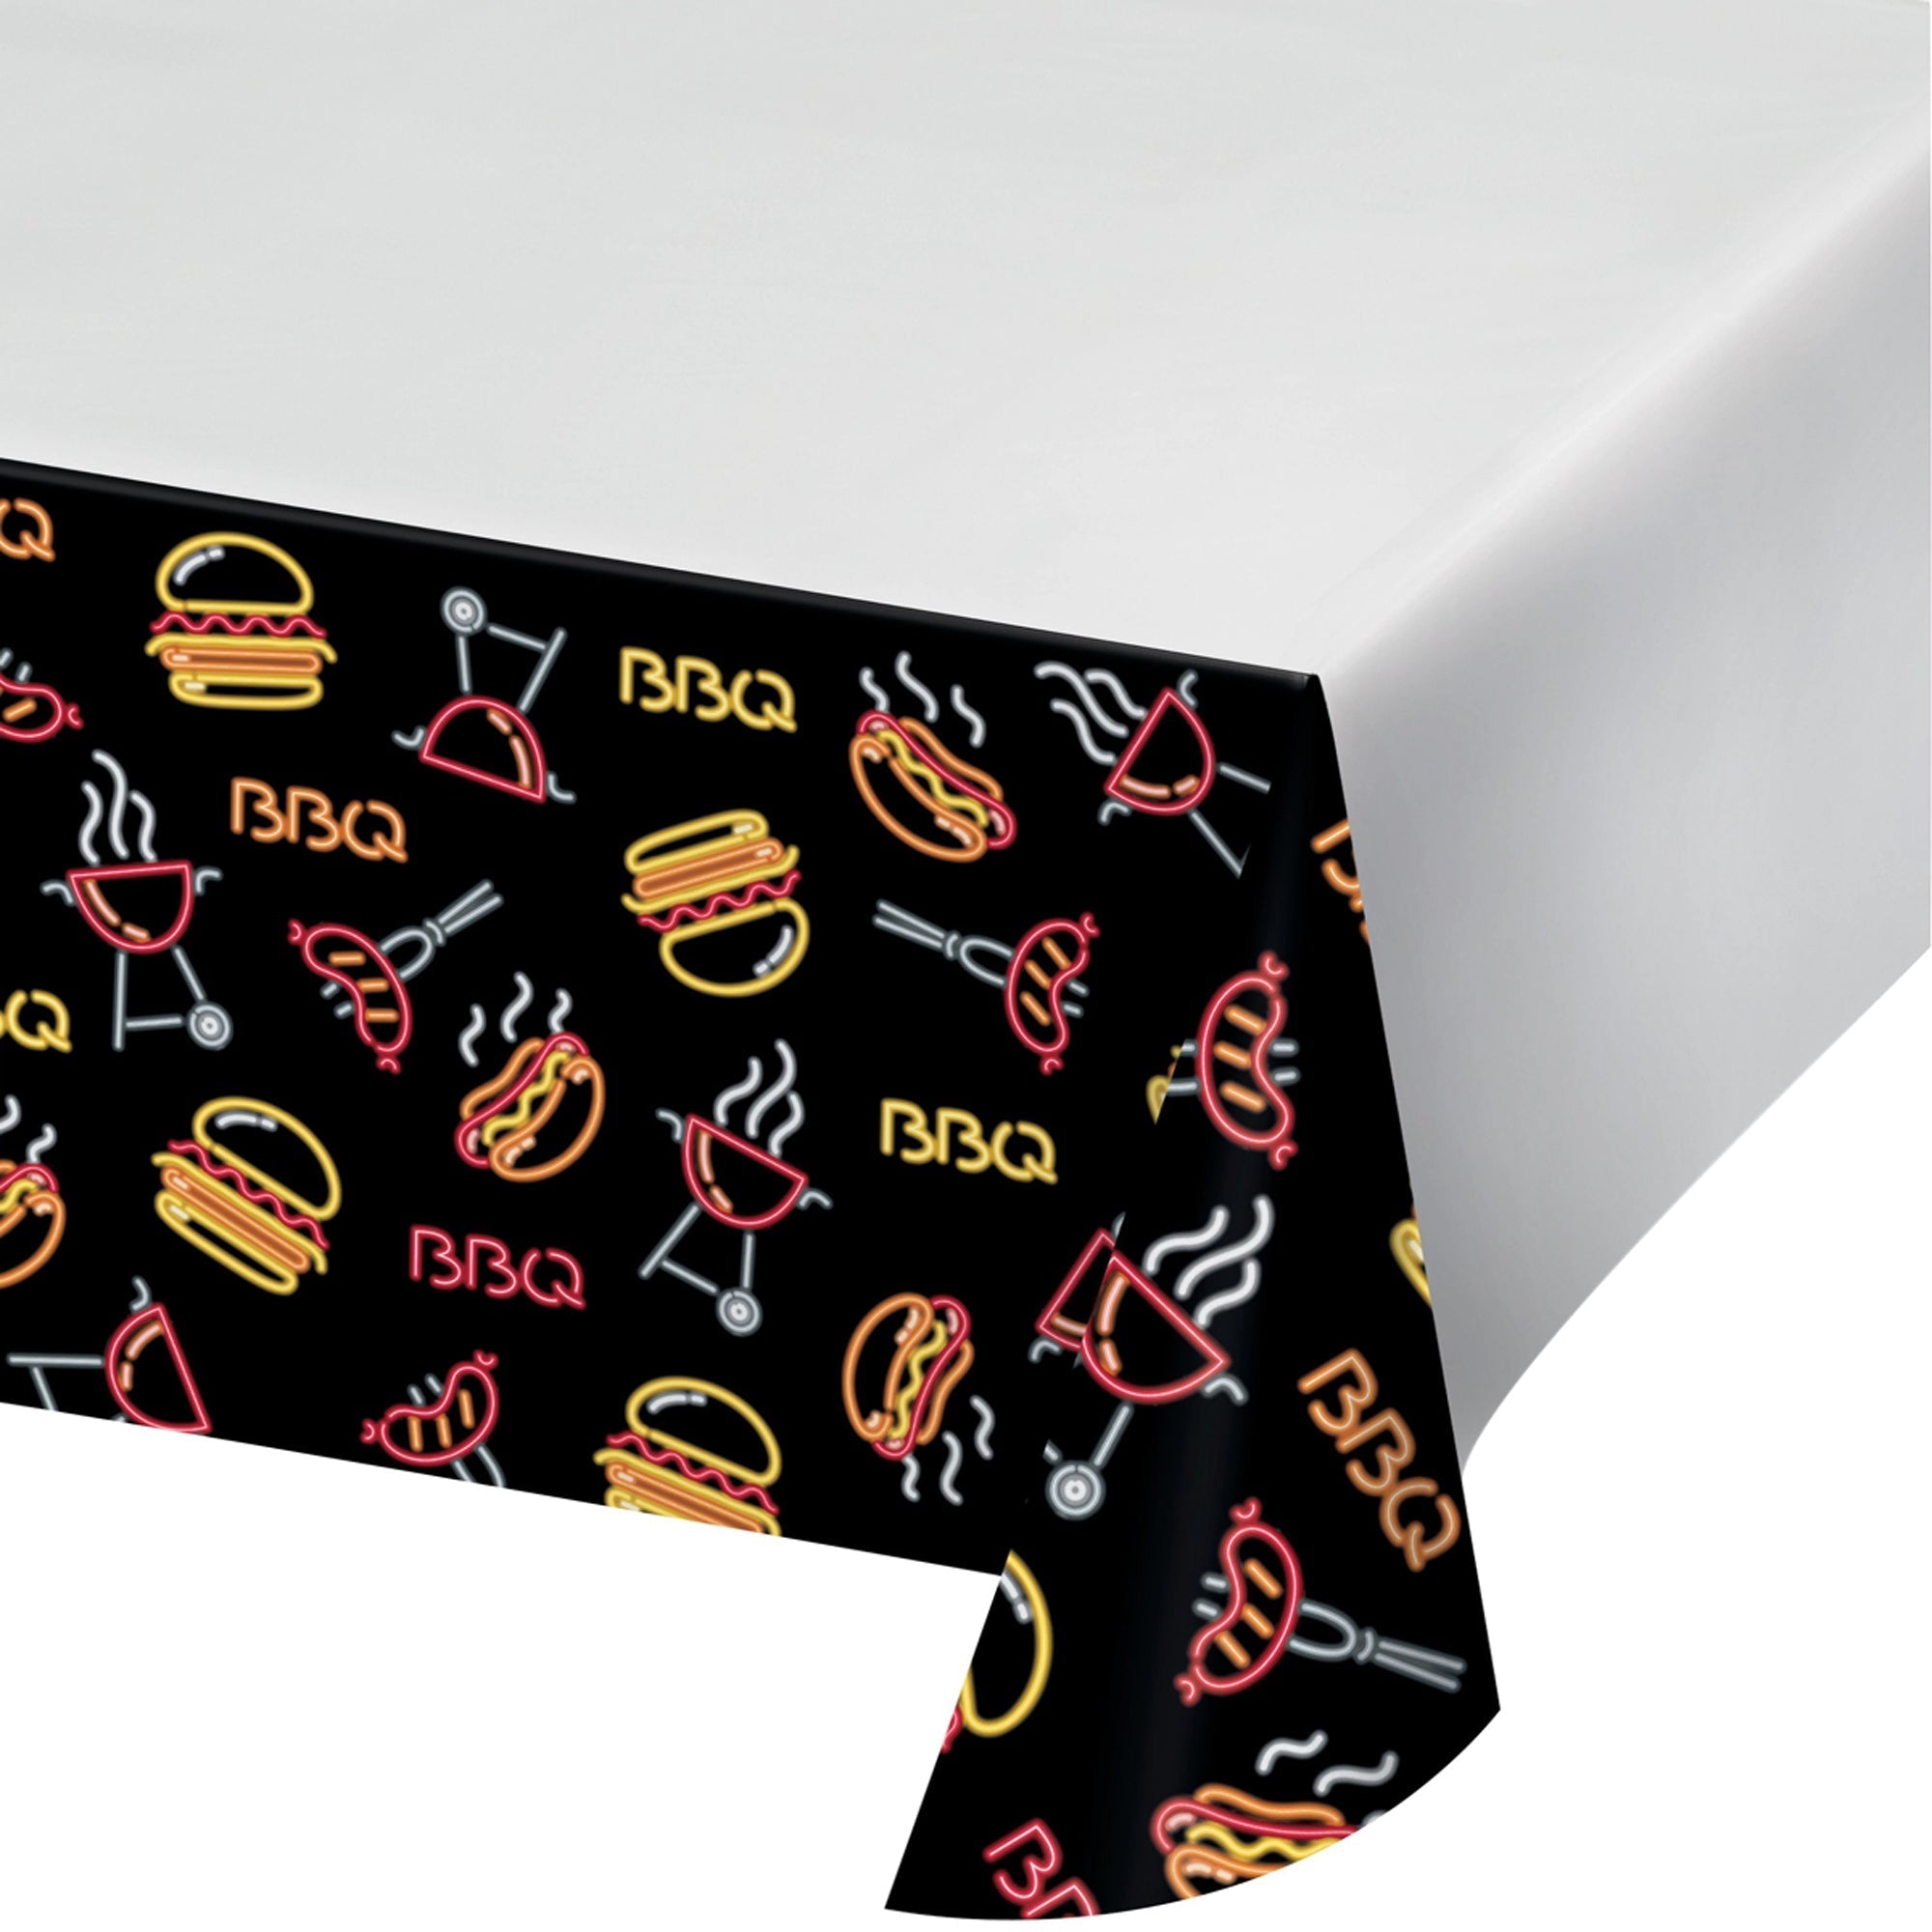 Neon BBQ Rectangular Paper Table Cover, 54 x 102 Inches, 1 Count